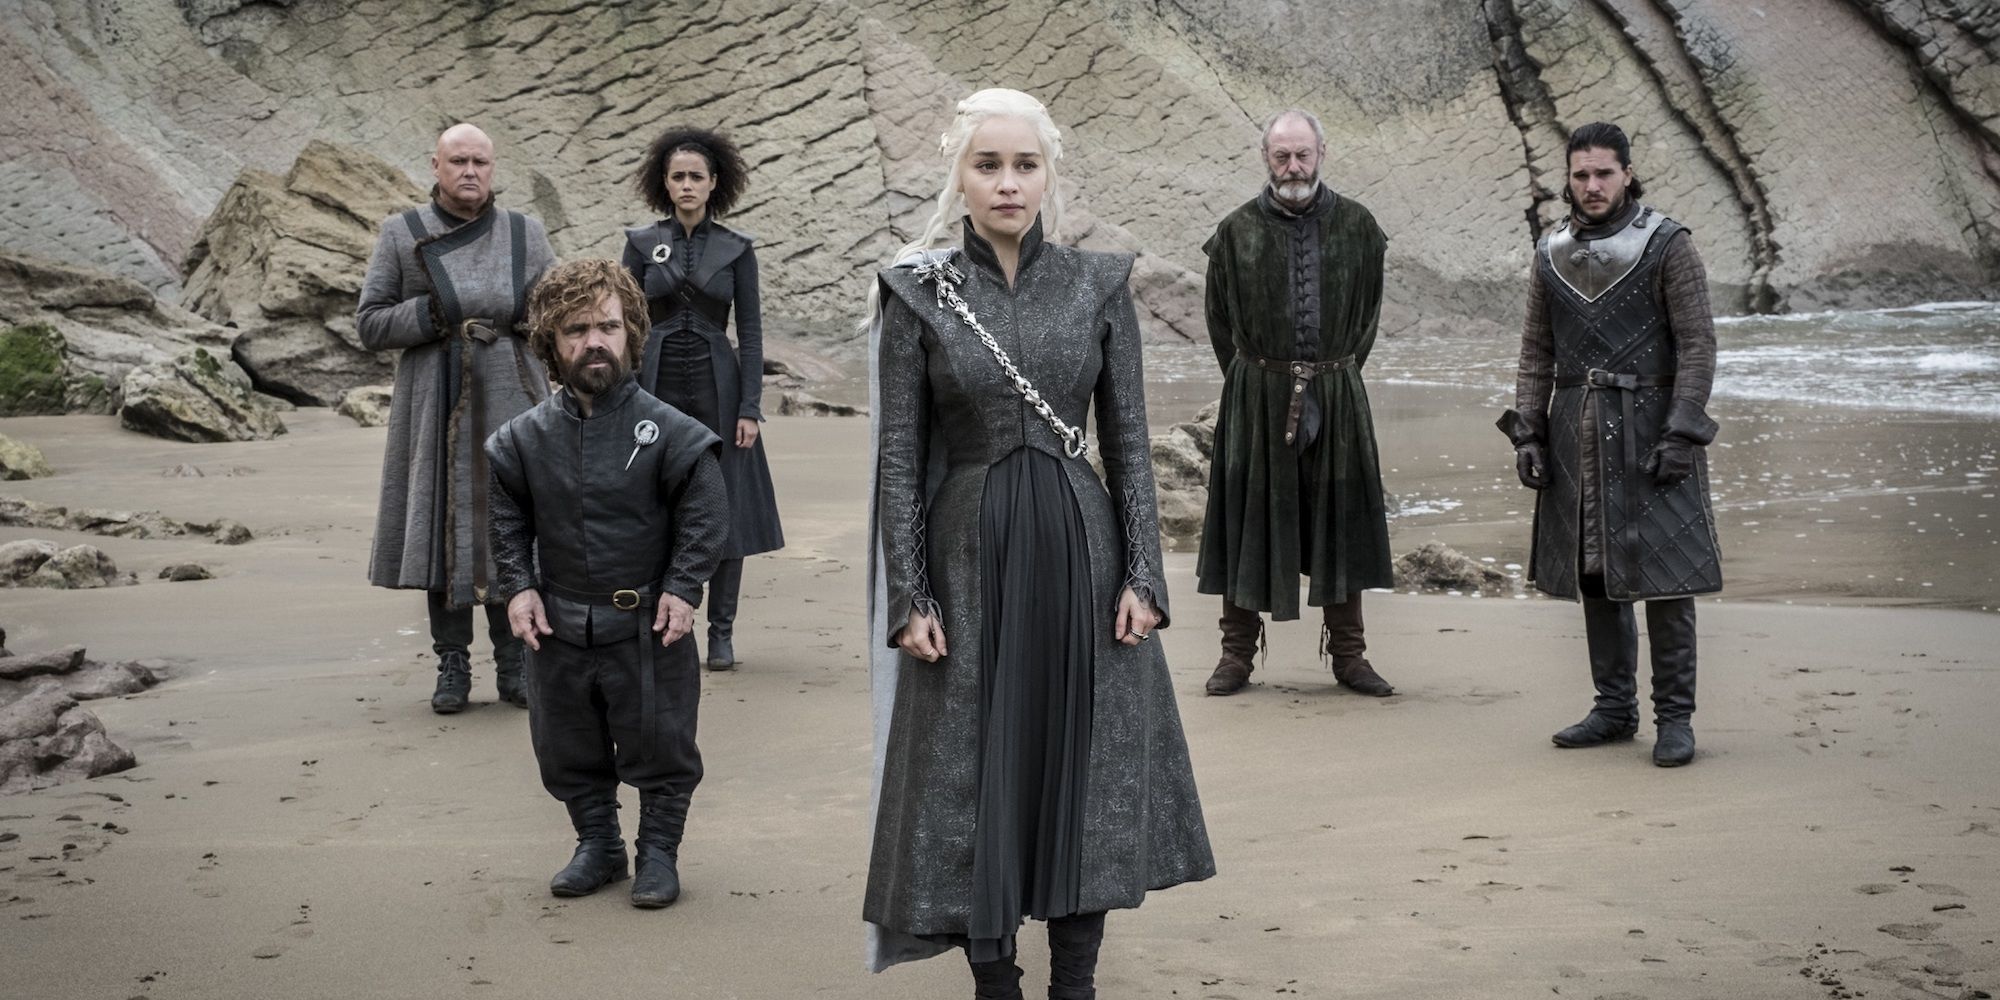 Game of Thrones Spoils of War - Tyrion, Daenerys, and Jon on the beach